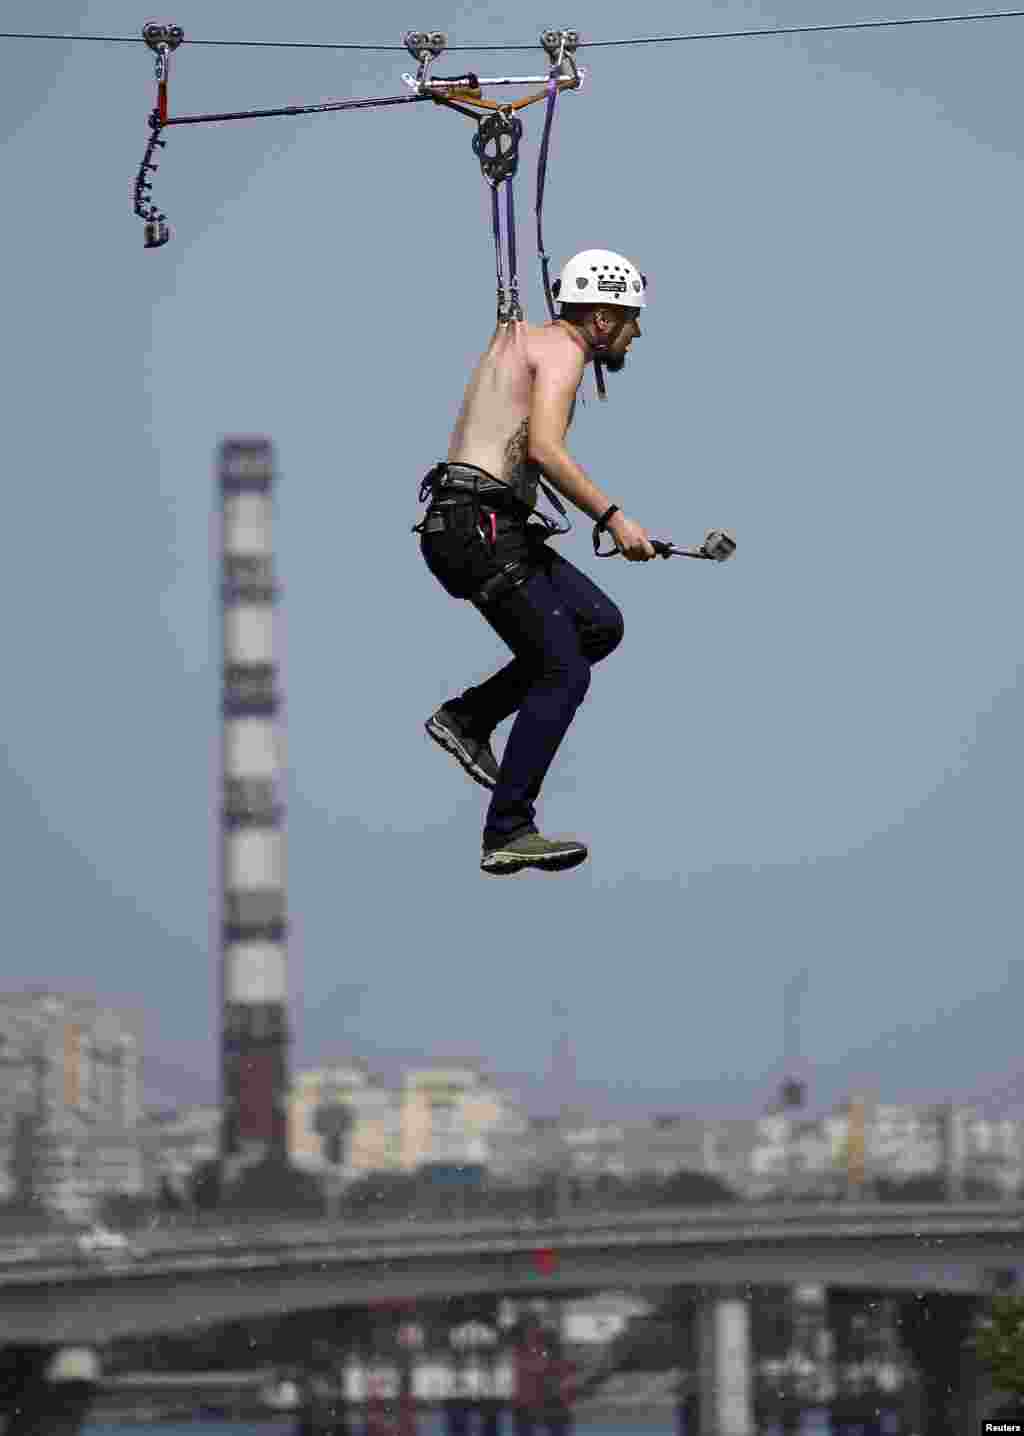 Pavlo Klets, 24, rides a Tyrolean traverse over the Dnipro River, suspended by a cable wire with metal clamps pierced directly into the skin of his back to set a national record for the longest distance travelled on a Tyrolean traverse